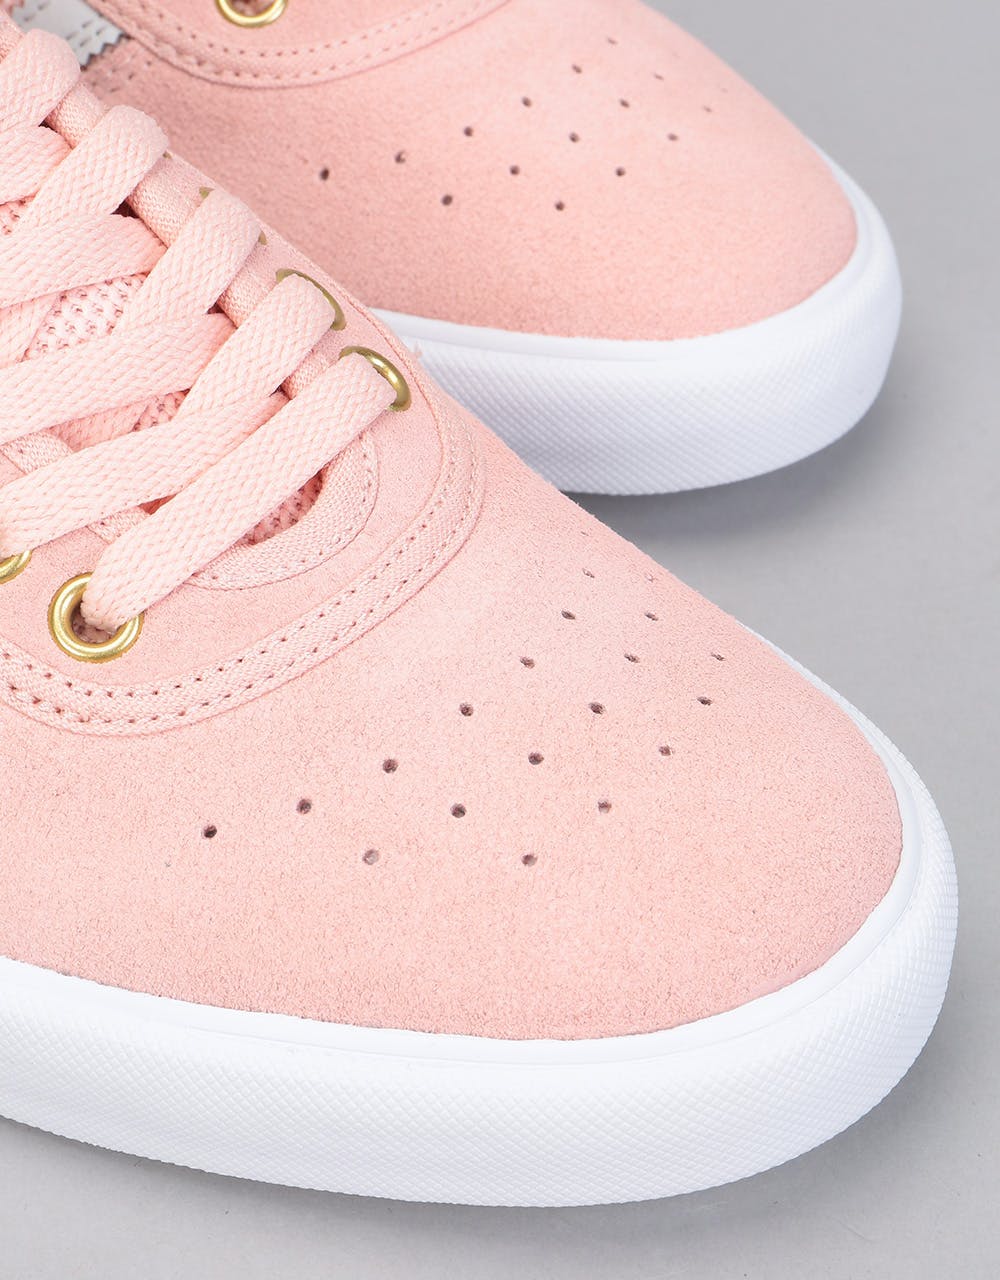 Adidas Lucas Premiere Skate Shoes - Vapour Pink/Grey One/White